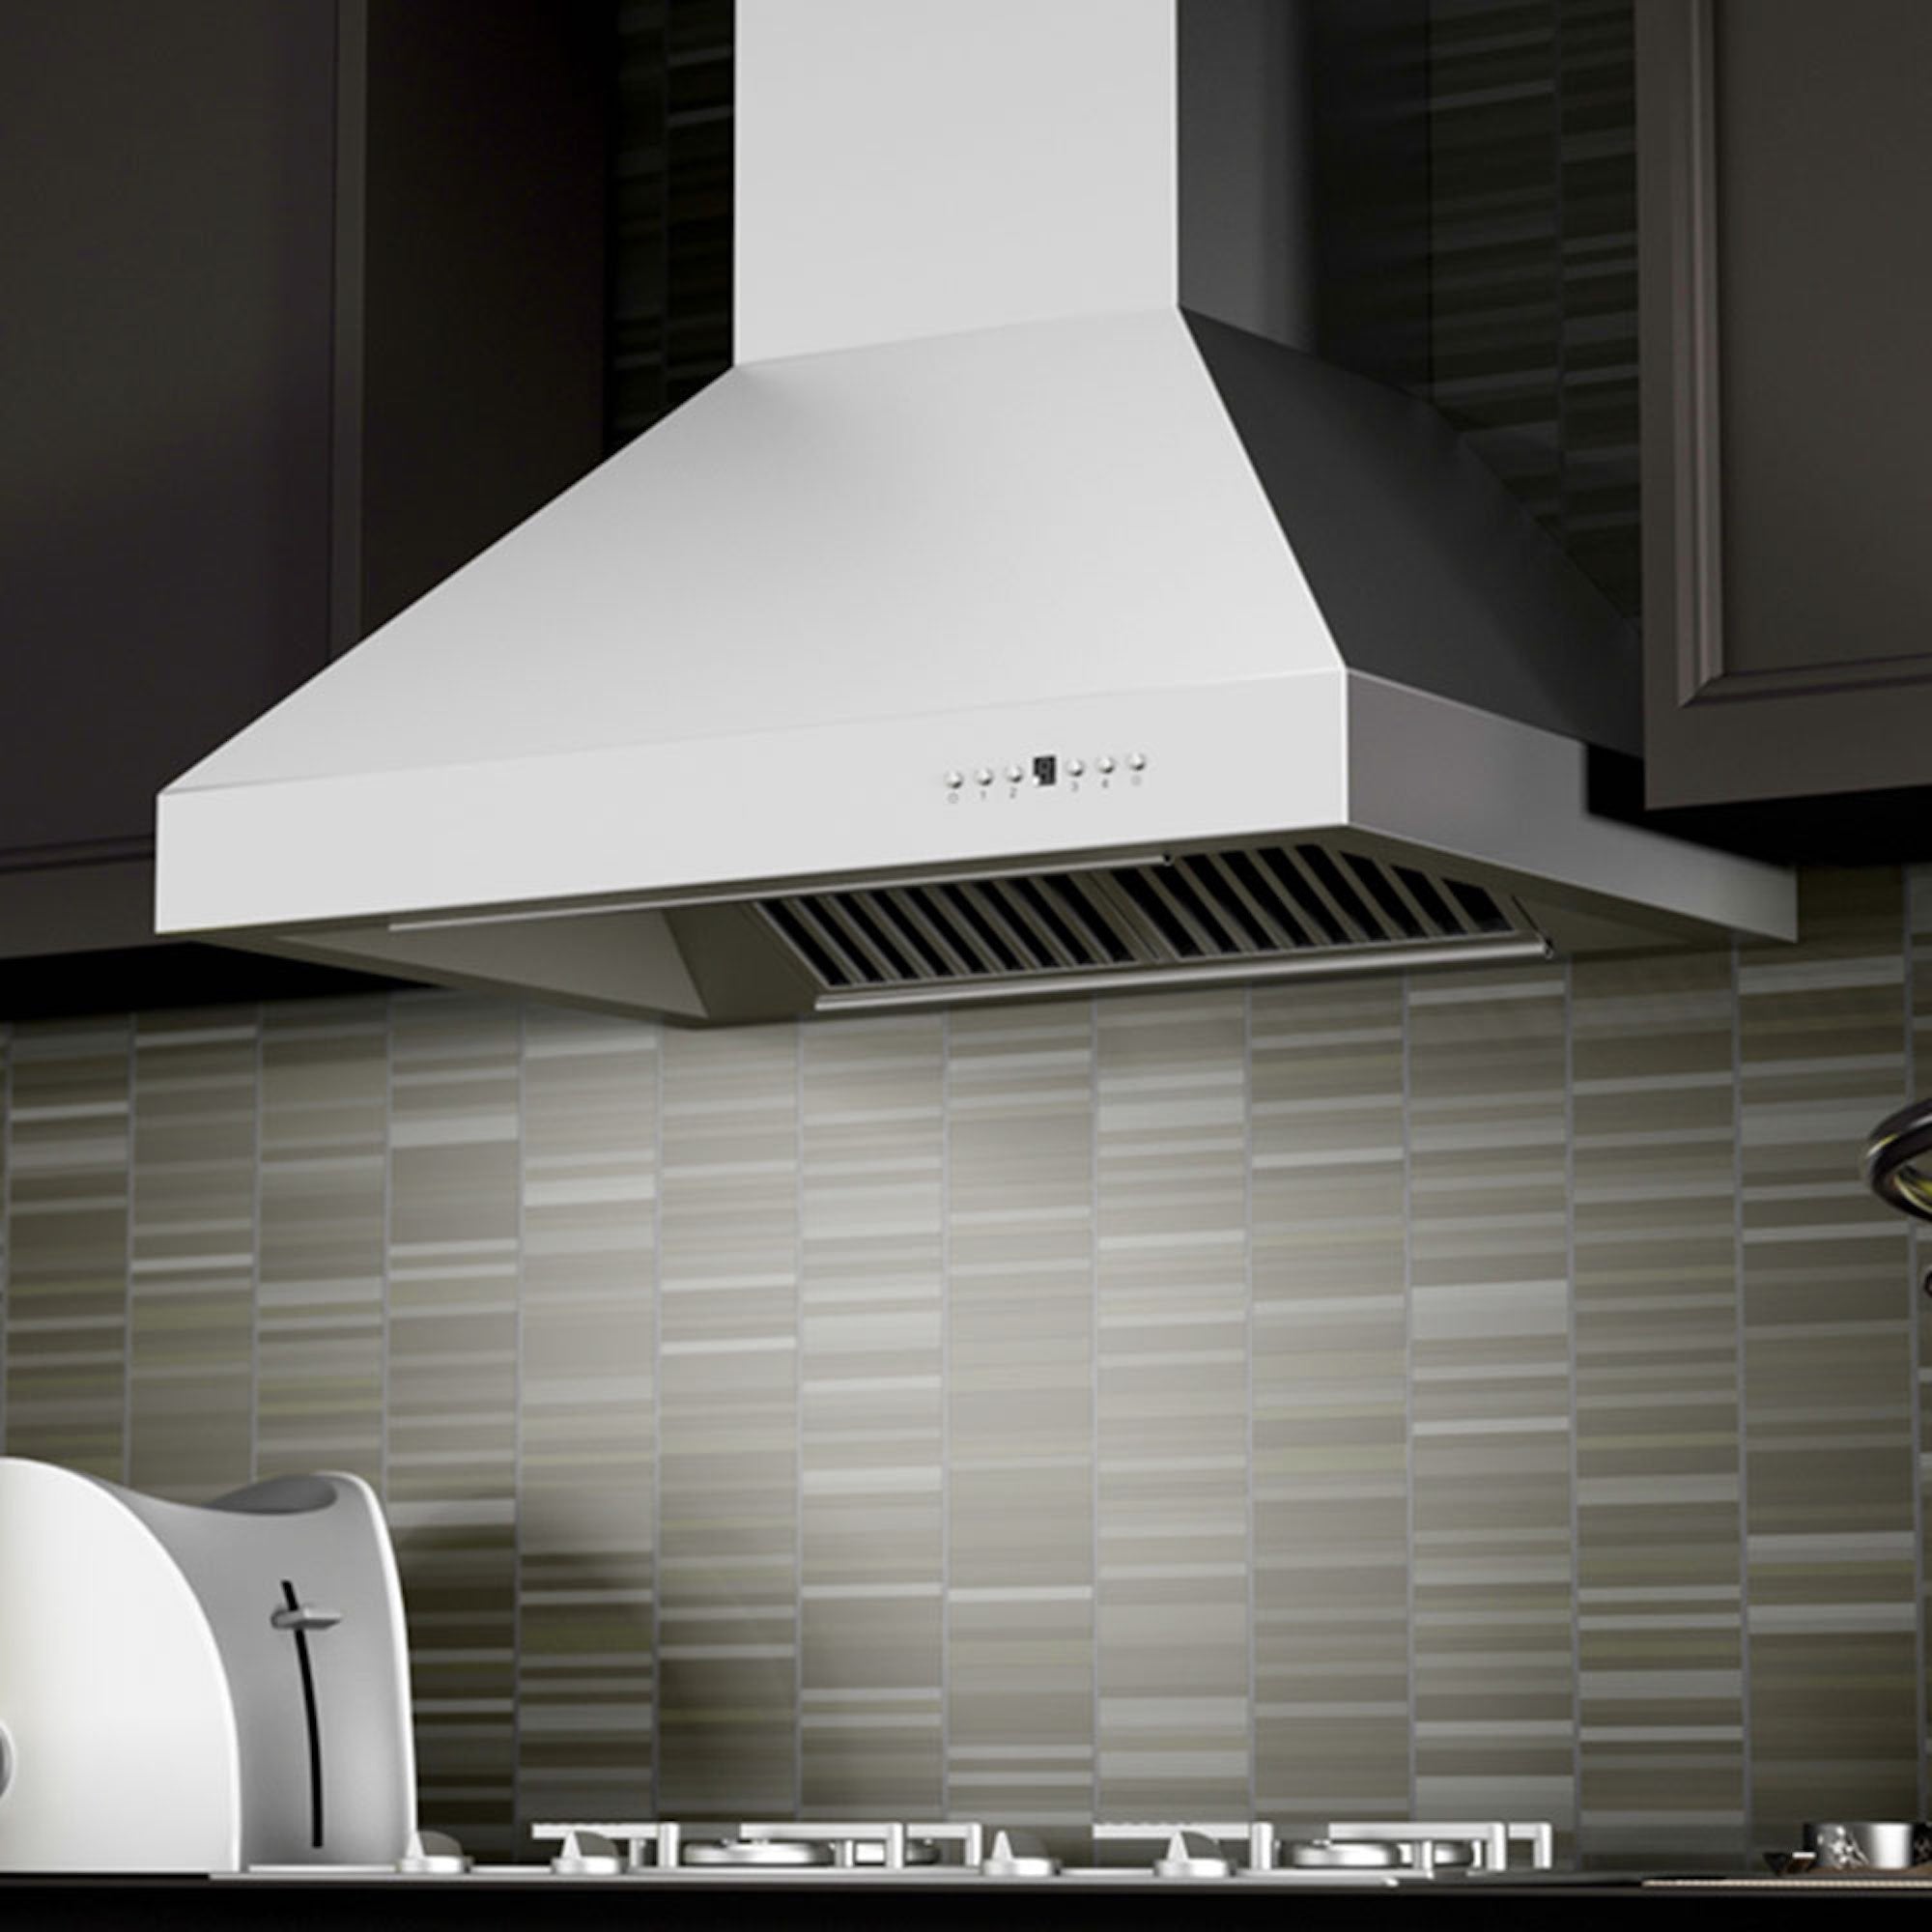 ZLINE 48" Ducted Wall Mount Range Hood with Dual Remote Blower in Stainless Steel (697-RD-48)